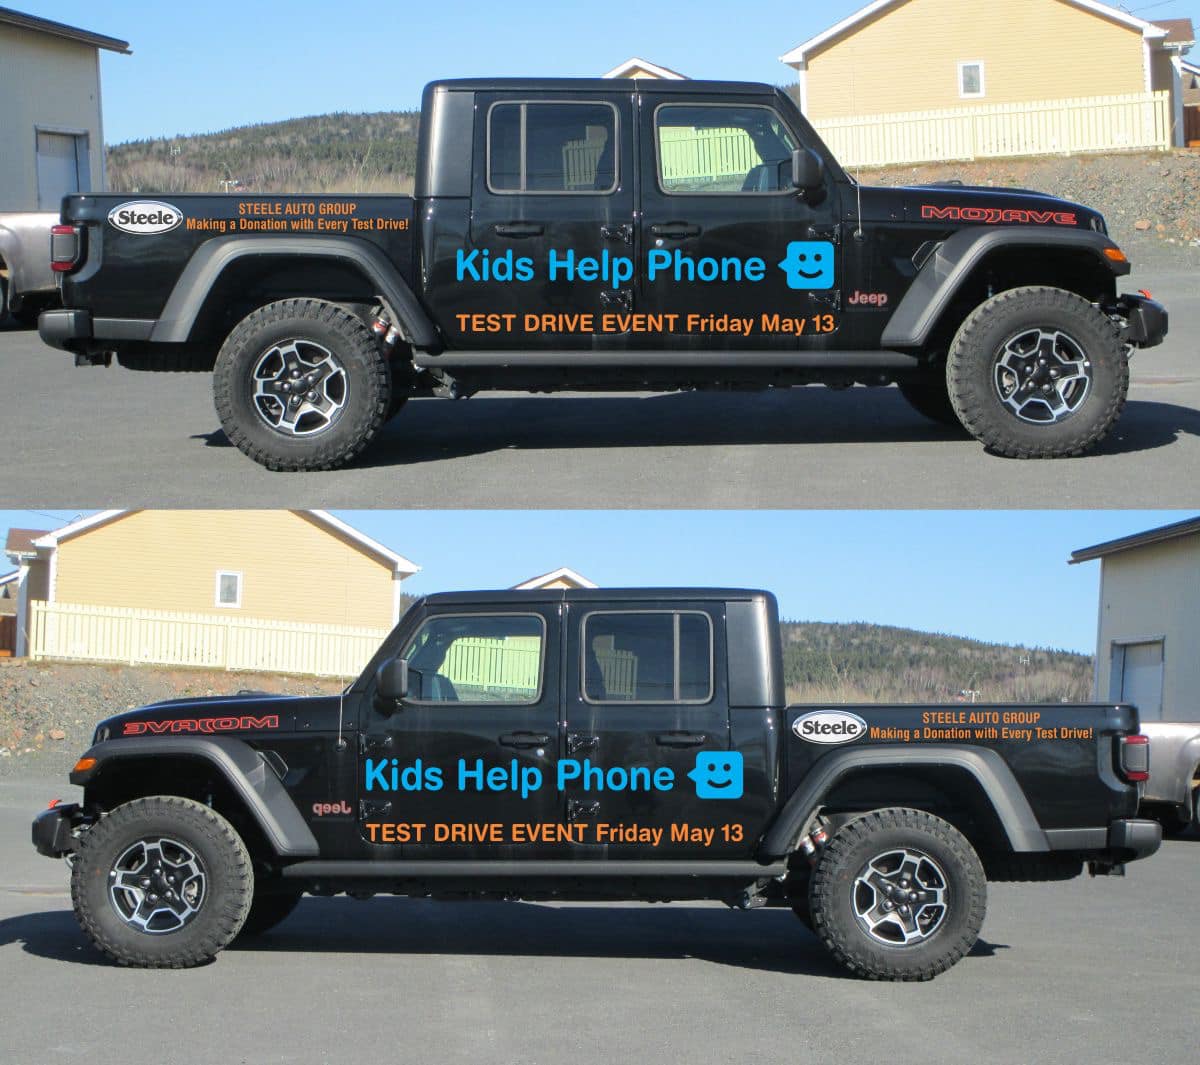 This Friday, May 13th Steele Clarenville Chrysler Dodge Jeep Ram, NL is hosting a Test Drive for @KidsHelpPhone Event!🚘

With every test drive we will make a donation to Kids Help Phone! $1000 gas card giveaway!⛽️

#steeleautogroup #whysteeleauto #kidshelpphone #steelegivesback